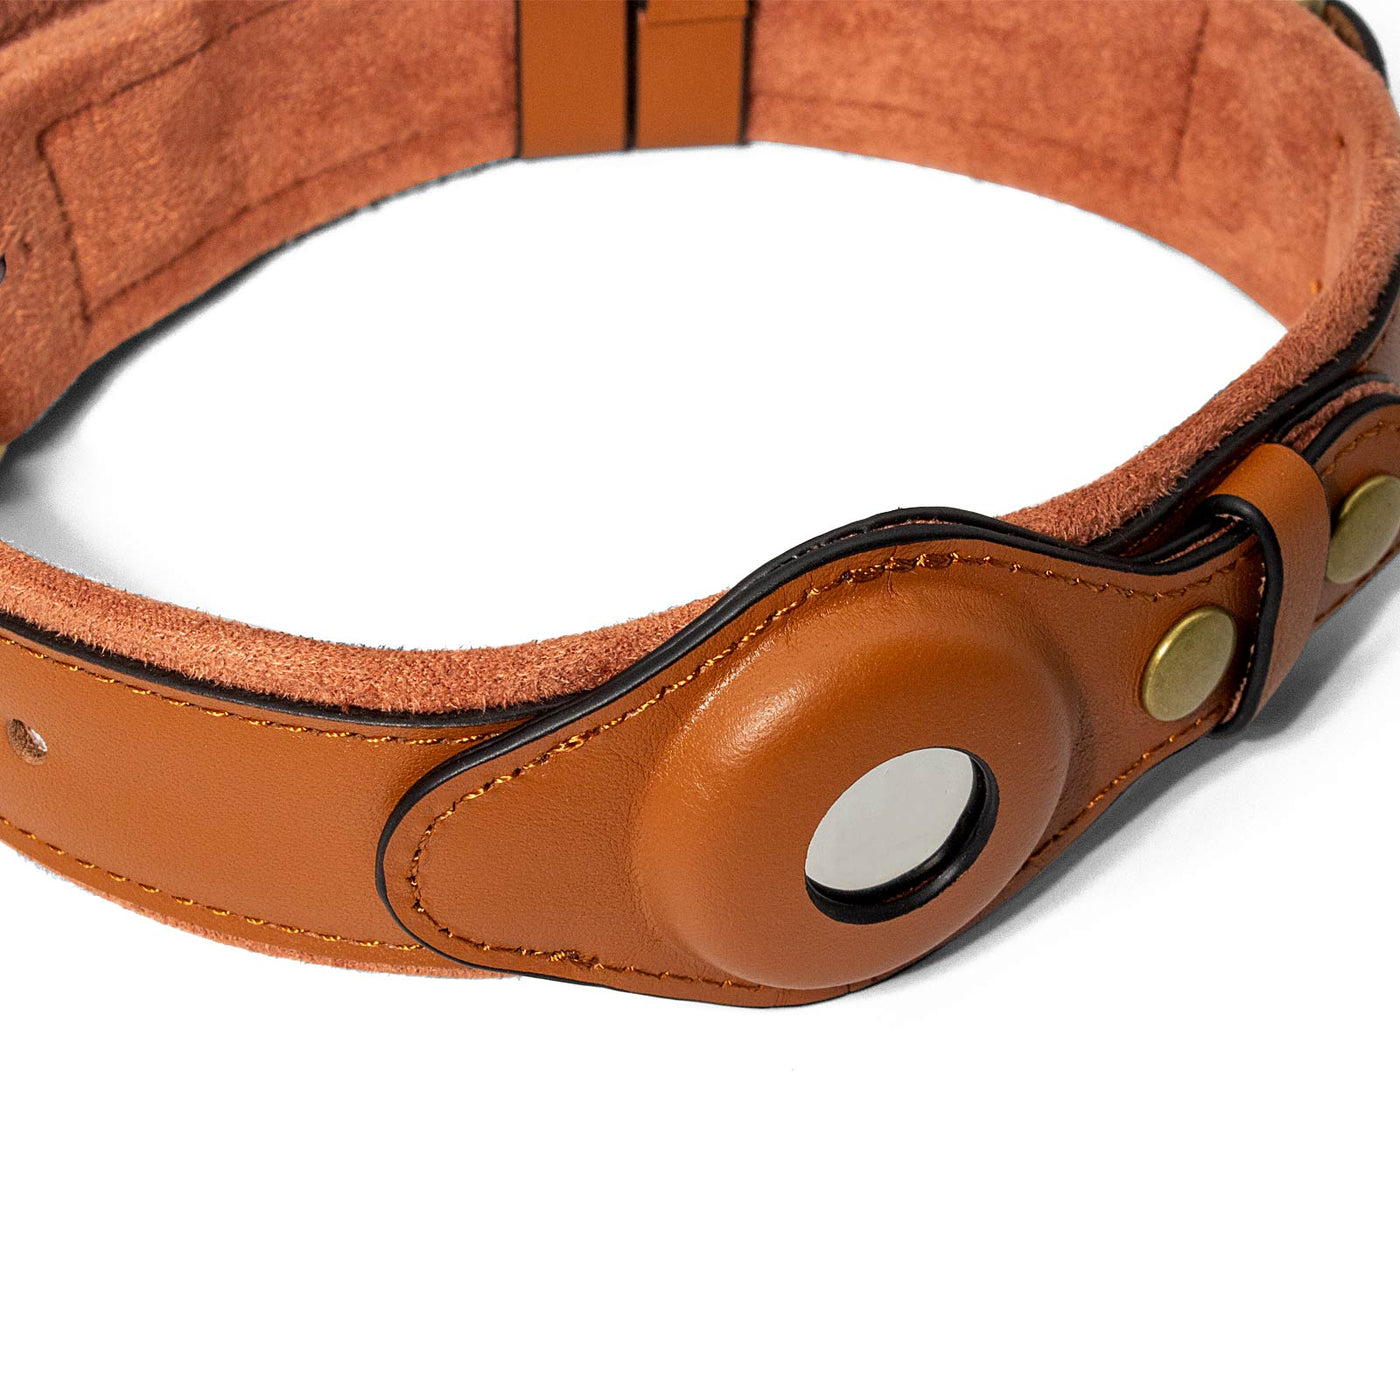 Genuine Leather Dog Collar with Airtag Case | Support Personalized Design